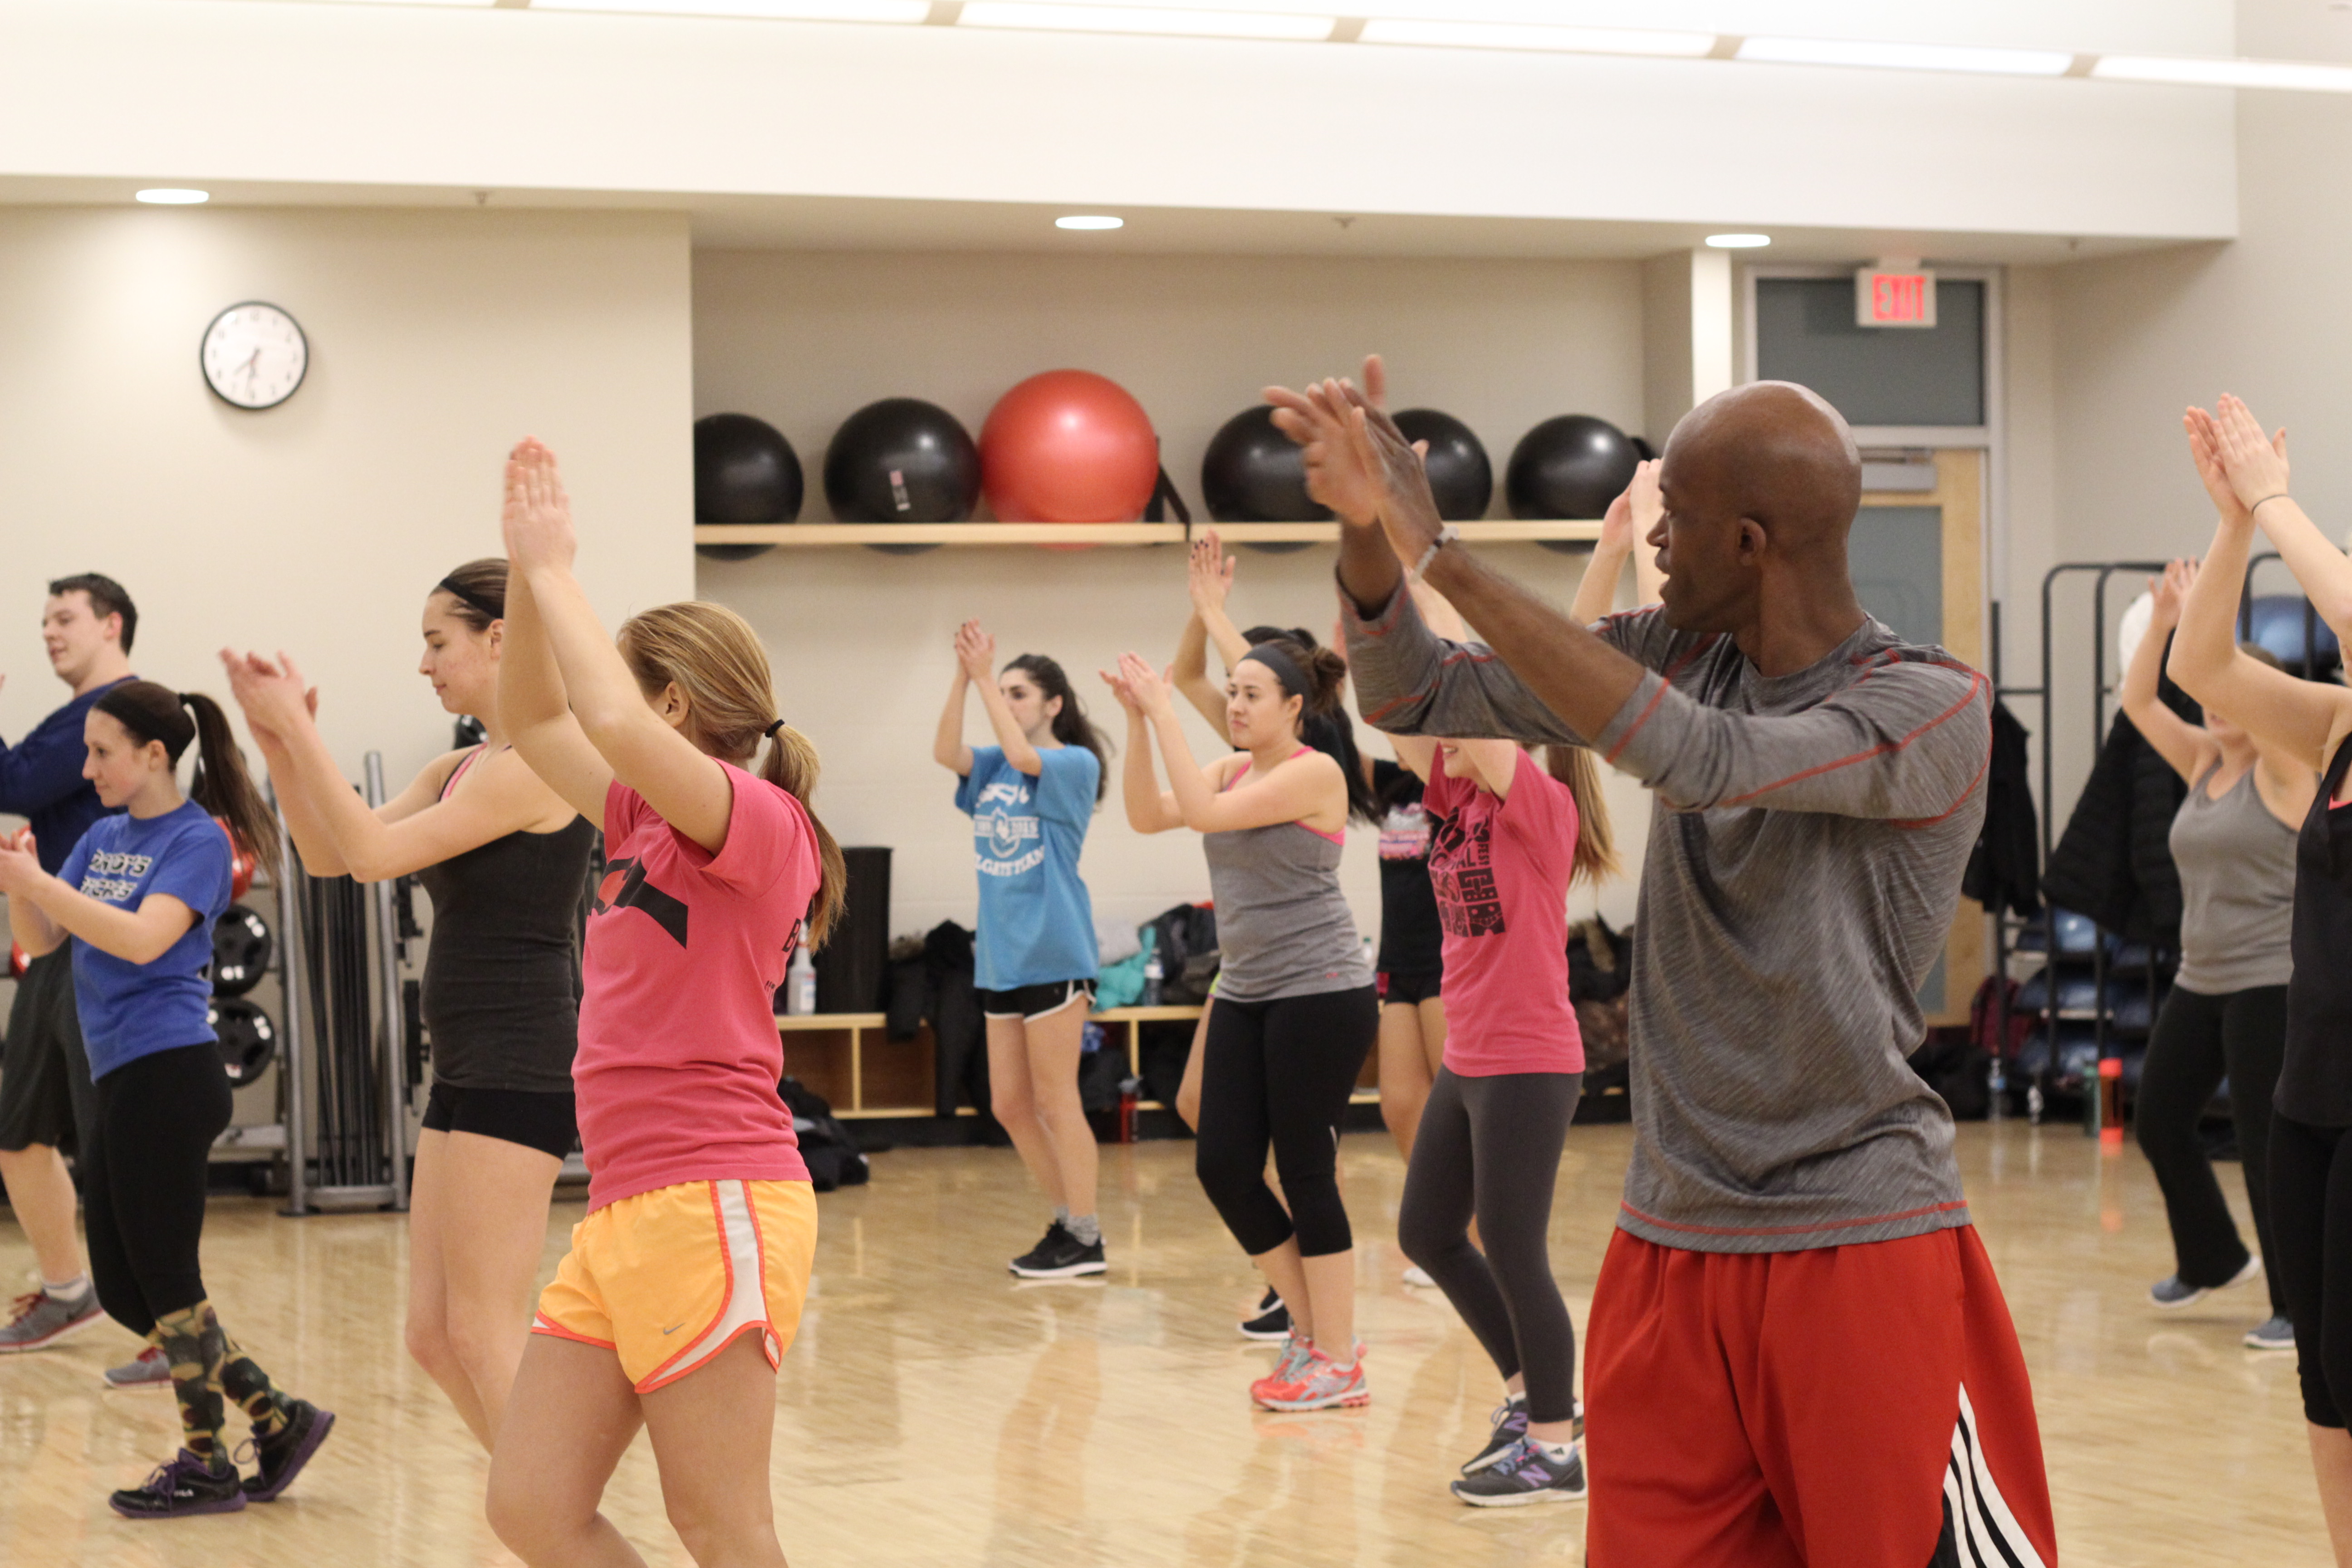 Students in a fitness class